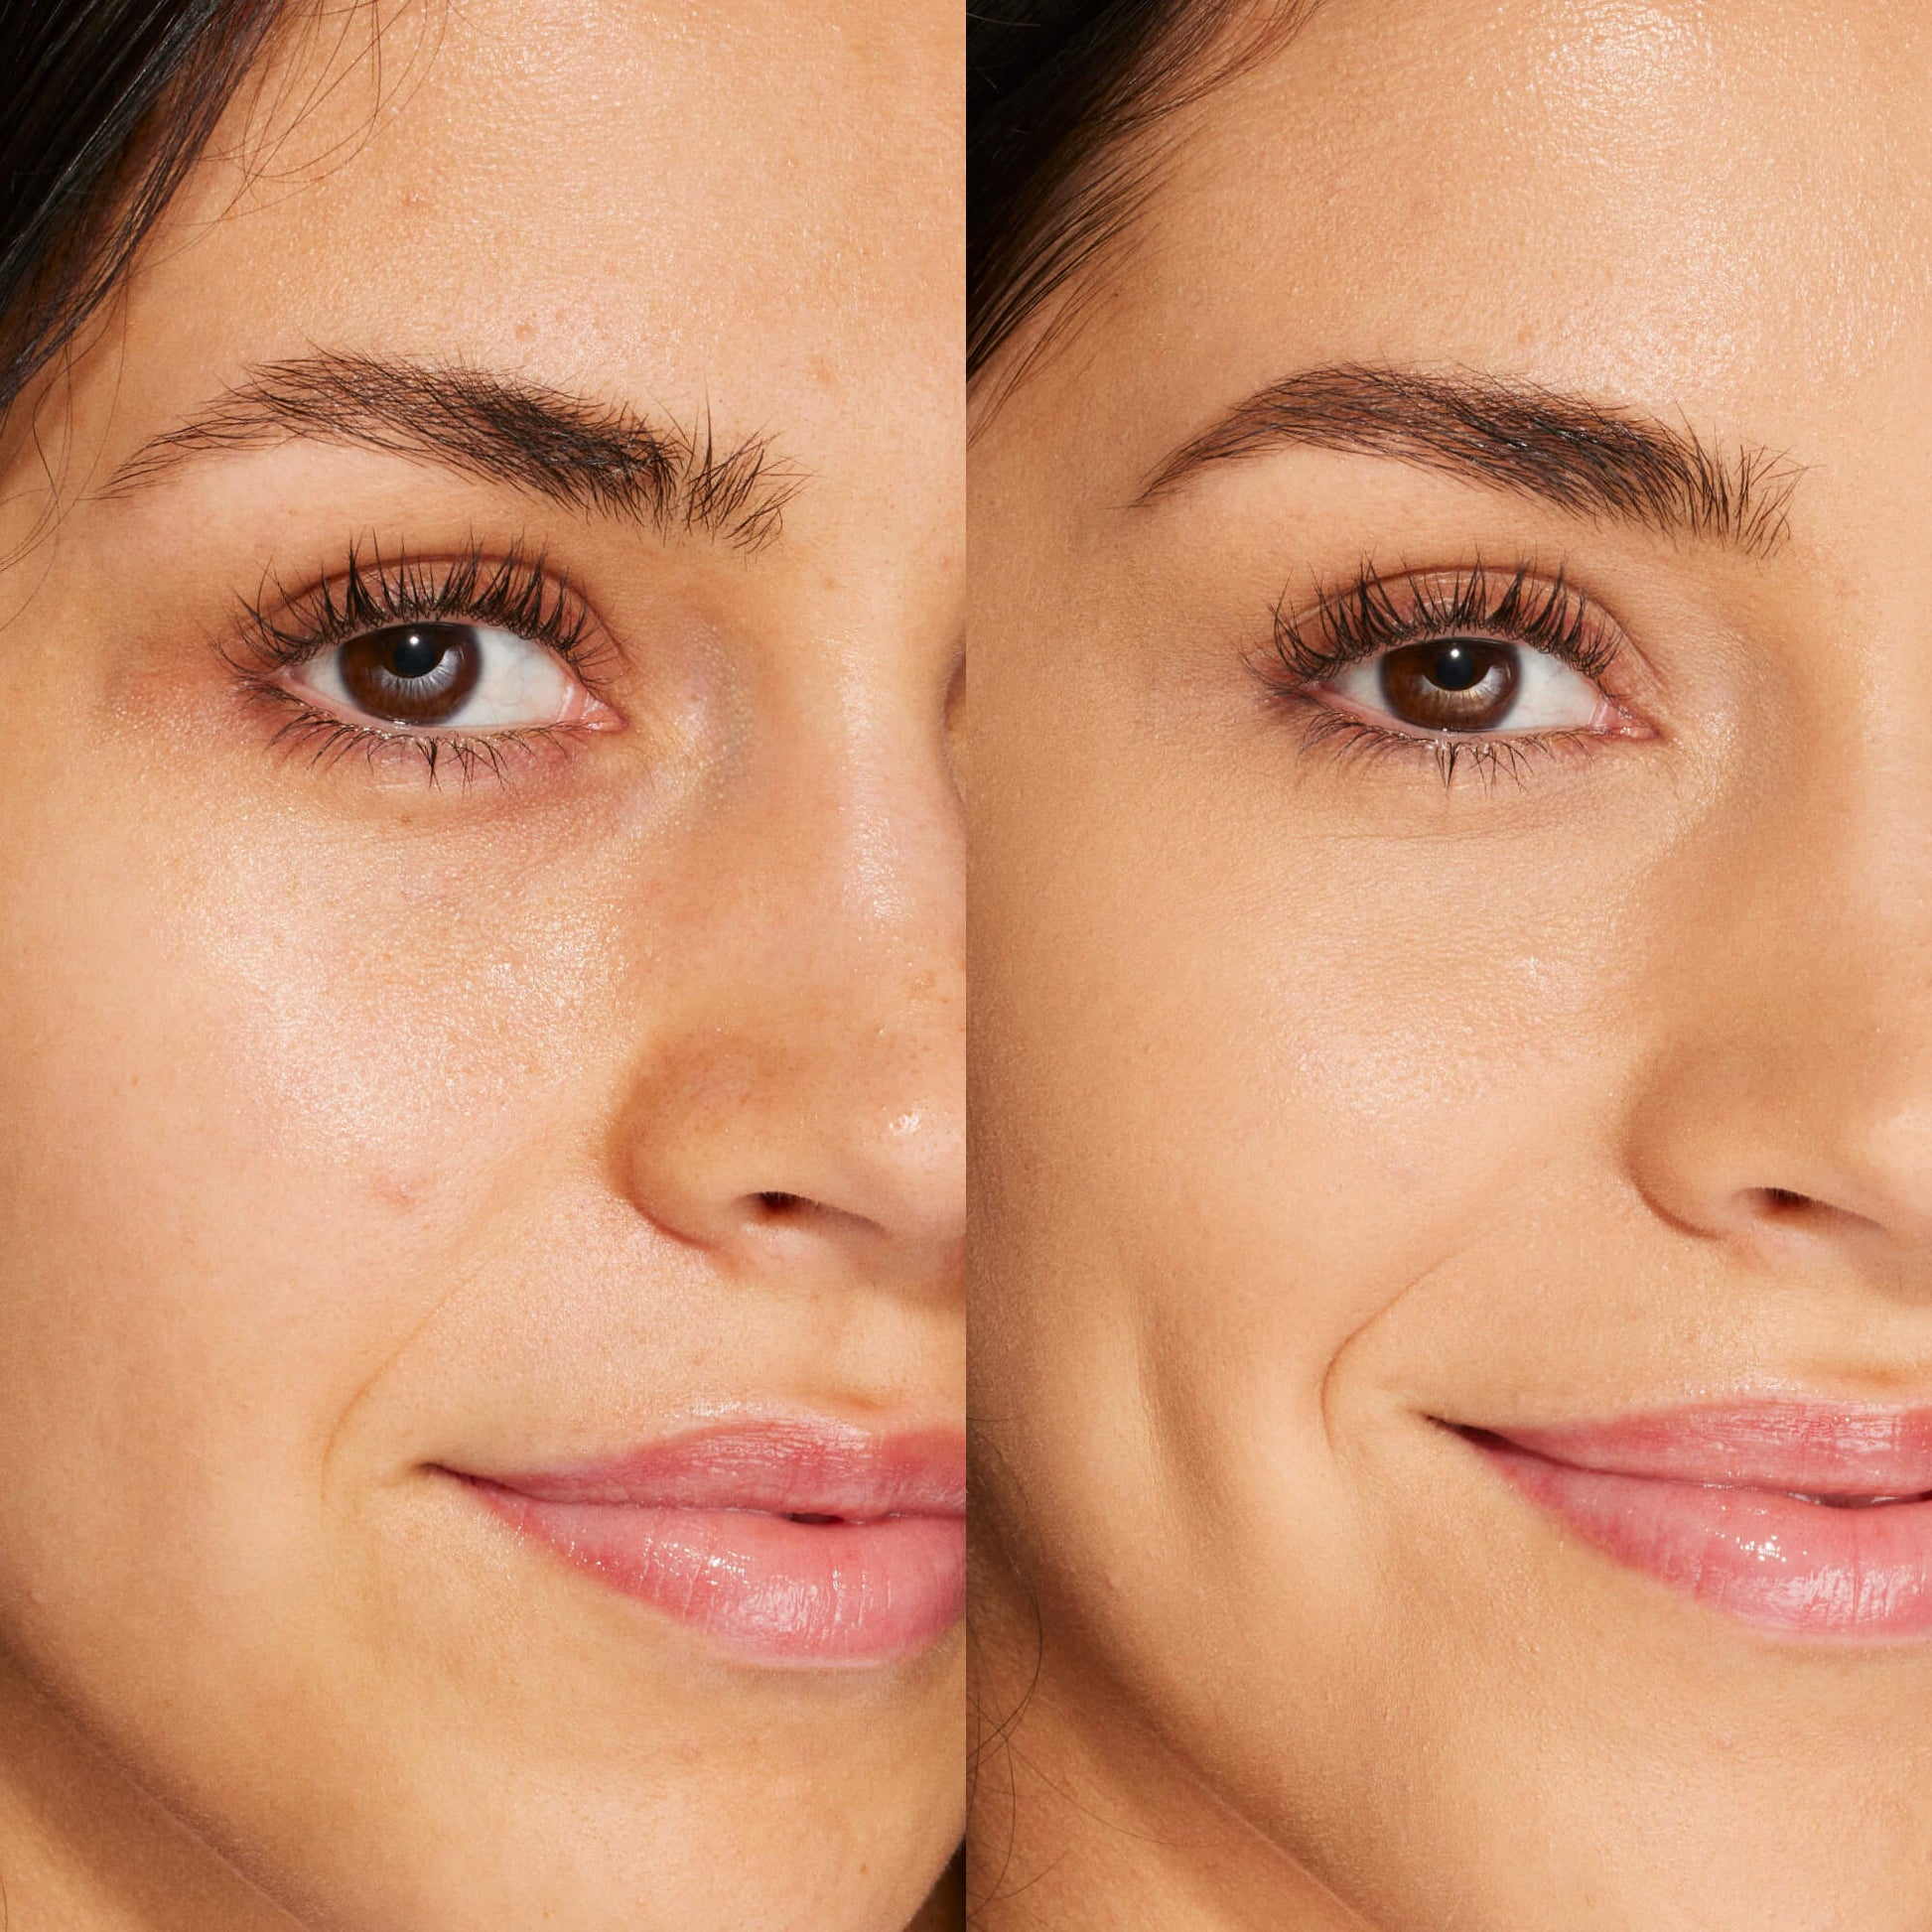 A person's face before and after using Tower 28 Beauty's Swipe Serum Concealer in shade 8.0 LBC to cover up dark circles, blemishes, and discoloration